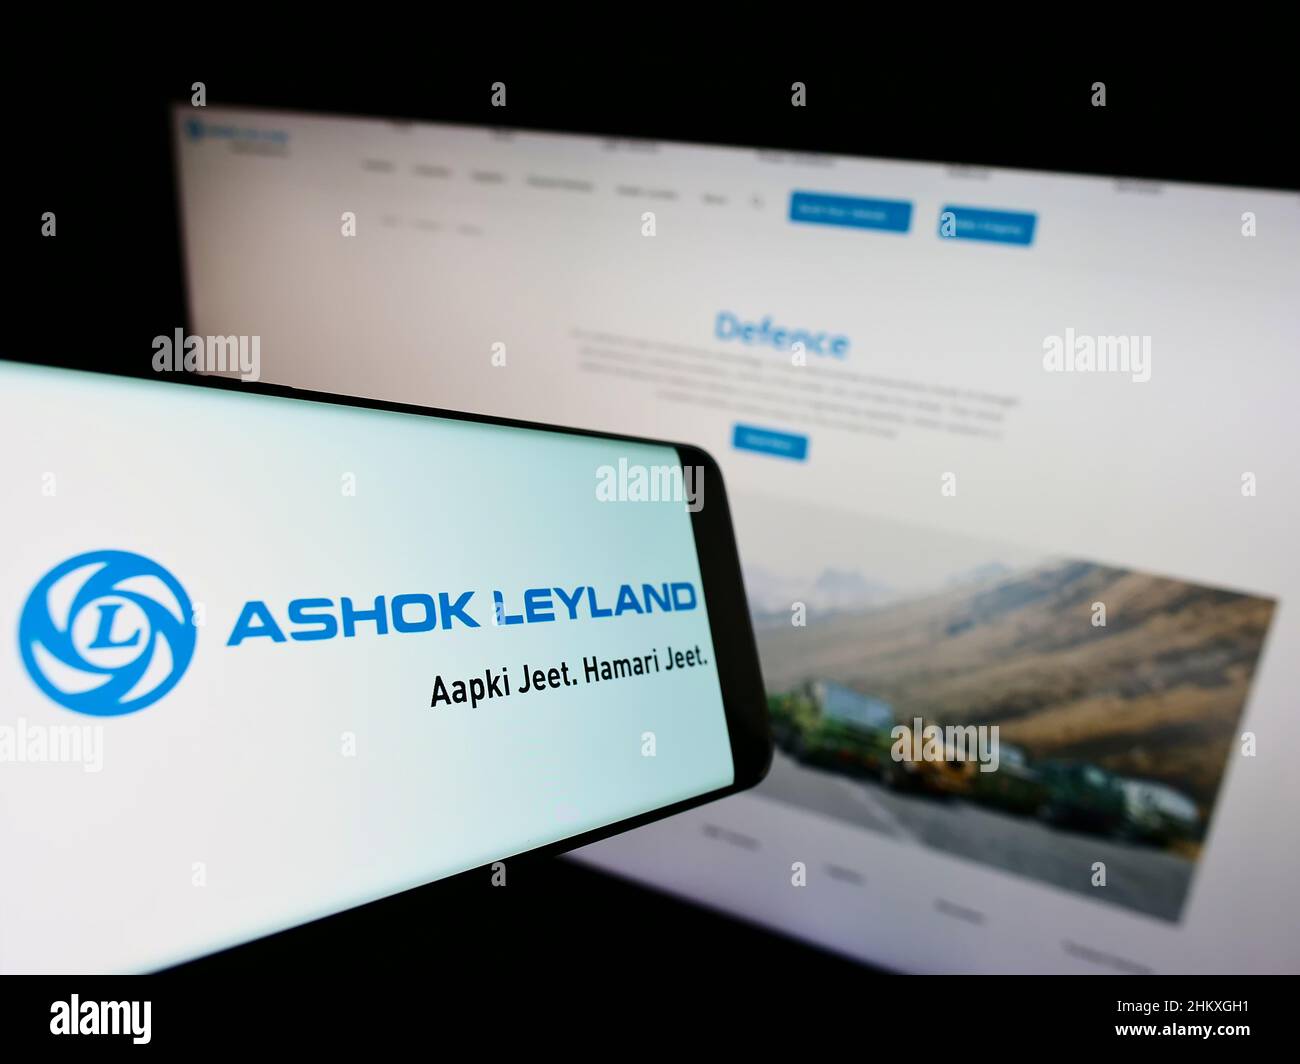 Mobile phone with logo of Indian automotive company Ashok Leyland Ltd. on screen in front of website. Focus on center-right of phone display. Stock Photo